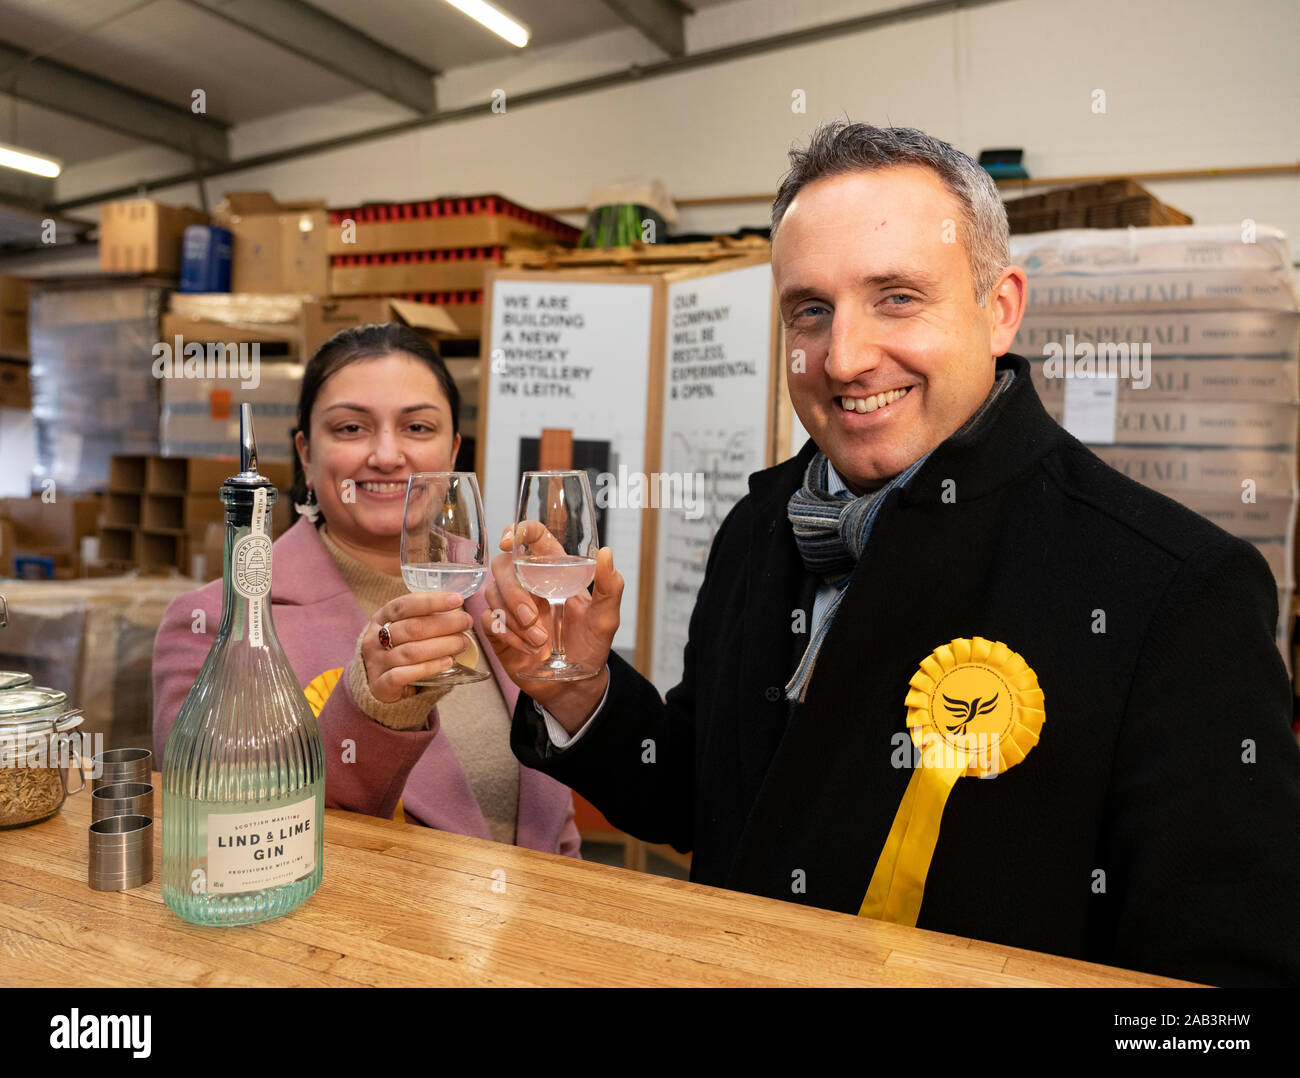 Leith, Scotland, UK. 25th November 2019. Scottish Liberal Democrat campaign chair Alex Cole-Hamilton and Rebecca Bell Liberal parliamentary candidate for Dunfermline and West Fife visited Port of Leith Distillery and outlined the party’s plans to target new ground such as Edinburgh North and Leith, as well as recapturing the party’s traditional Scottish heartlands in the snap general election. Iain Masterton/Alamy Live News. Stock Photo